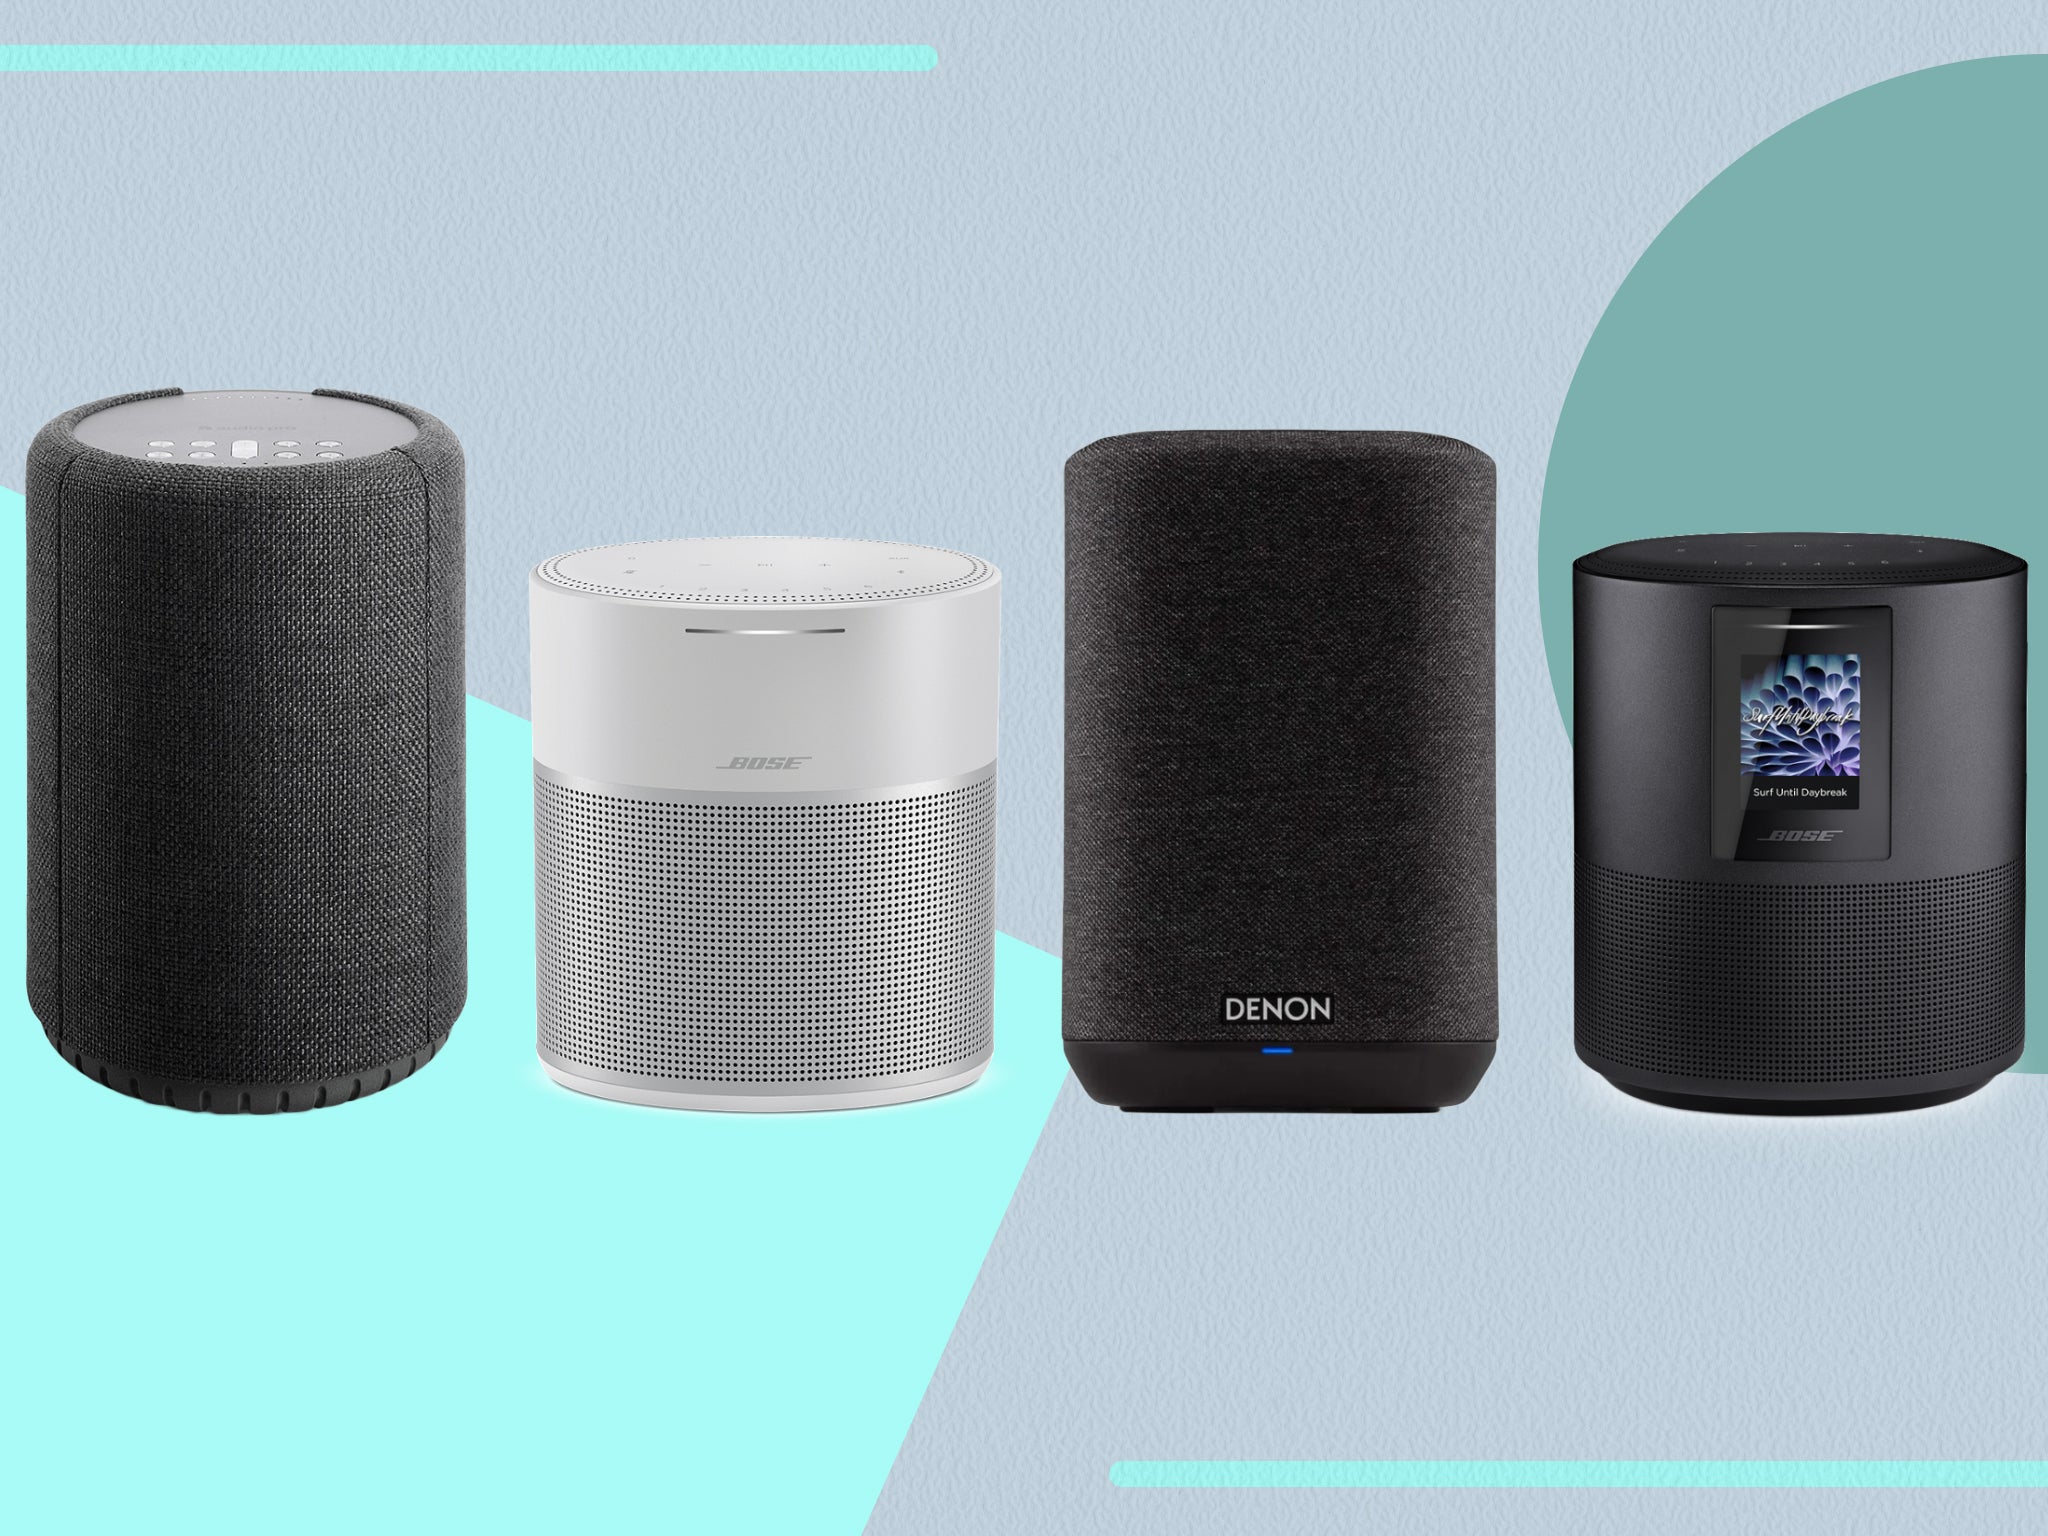 10 best multi-room speaker systems for wireless sound throughout your home